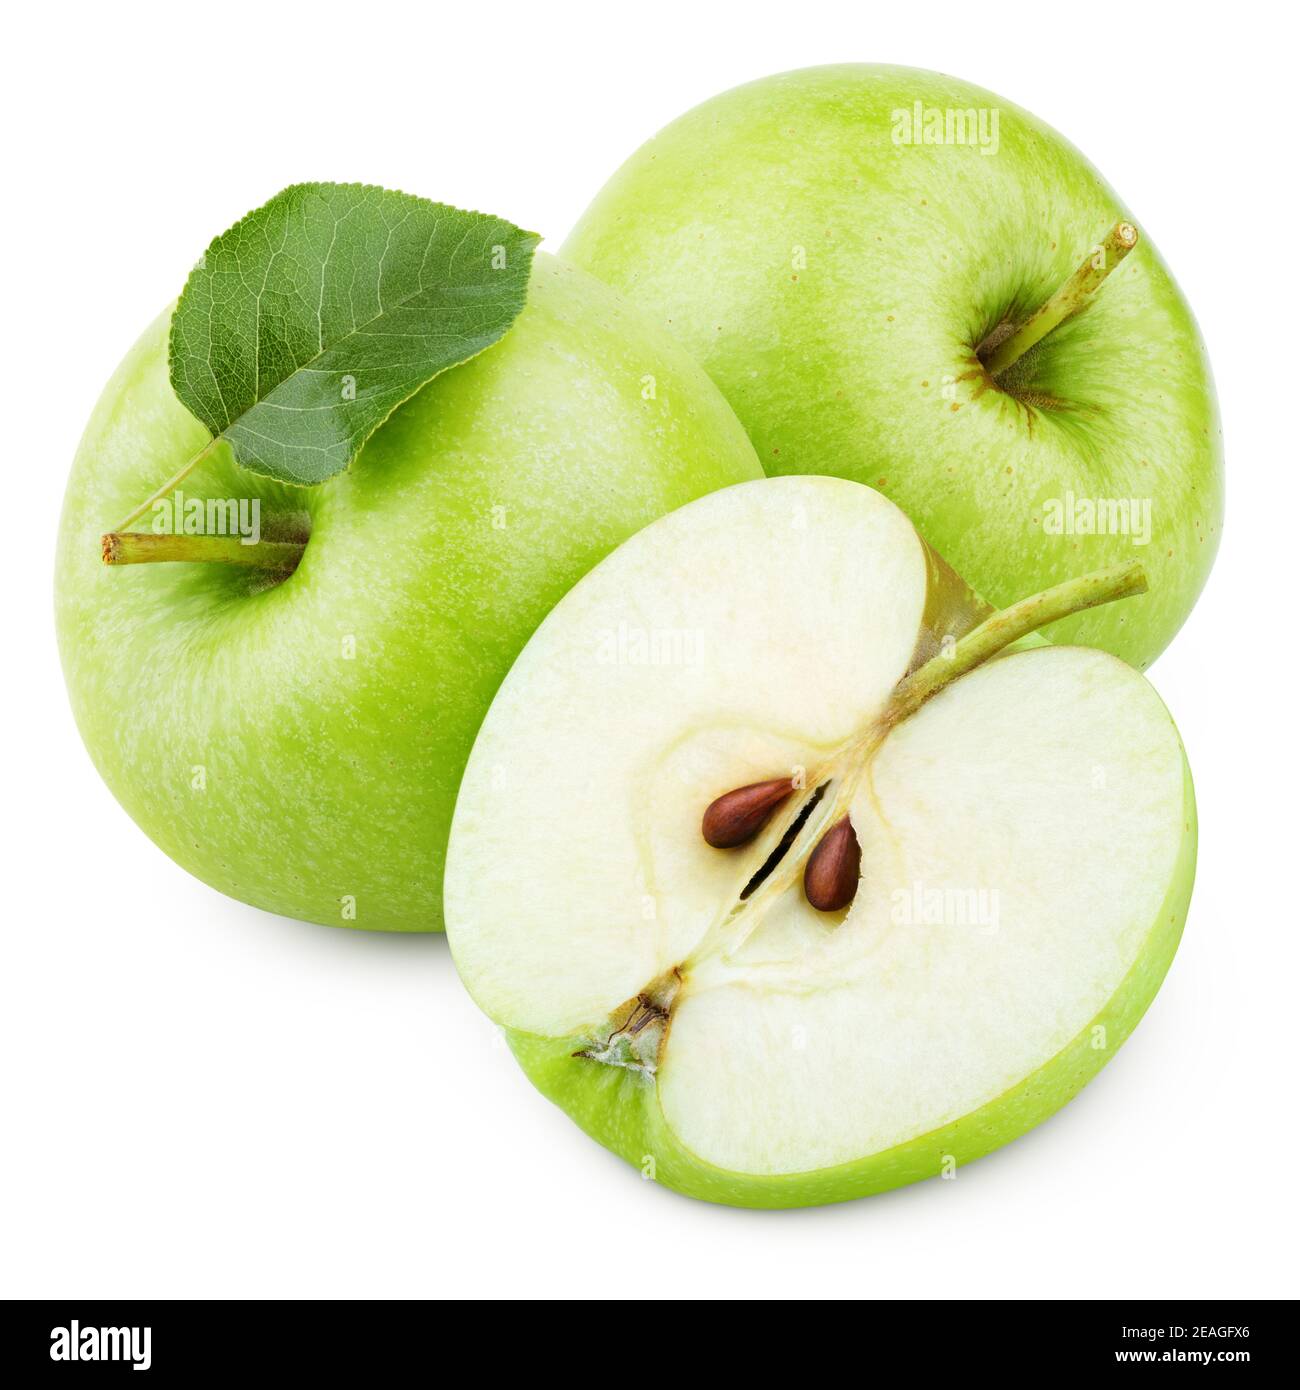 Group of ripe green apple fruits with apple half and green leaf isolated on white background. Apples with clipping path Stock Photo